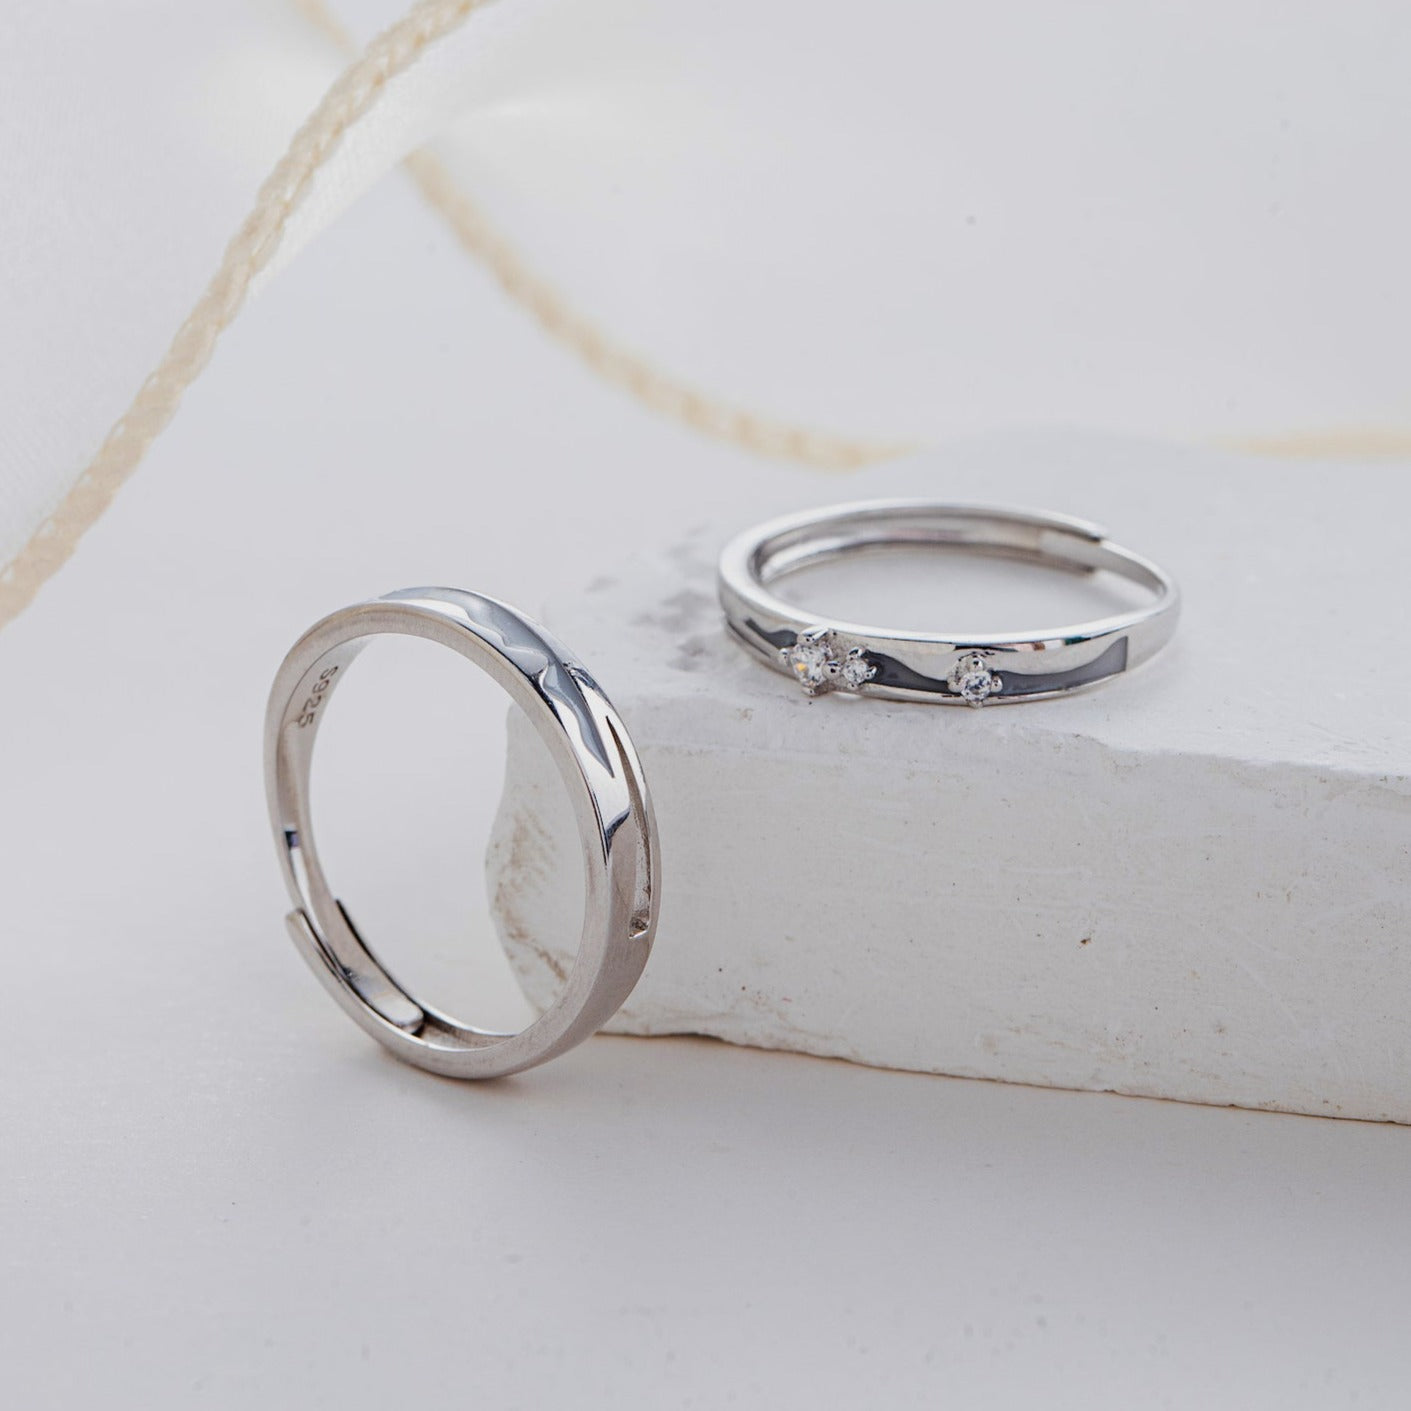 Glowing Matching 925 Silver Couple Rings